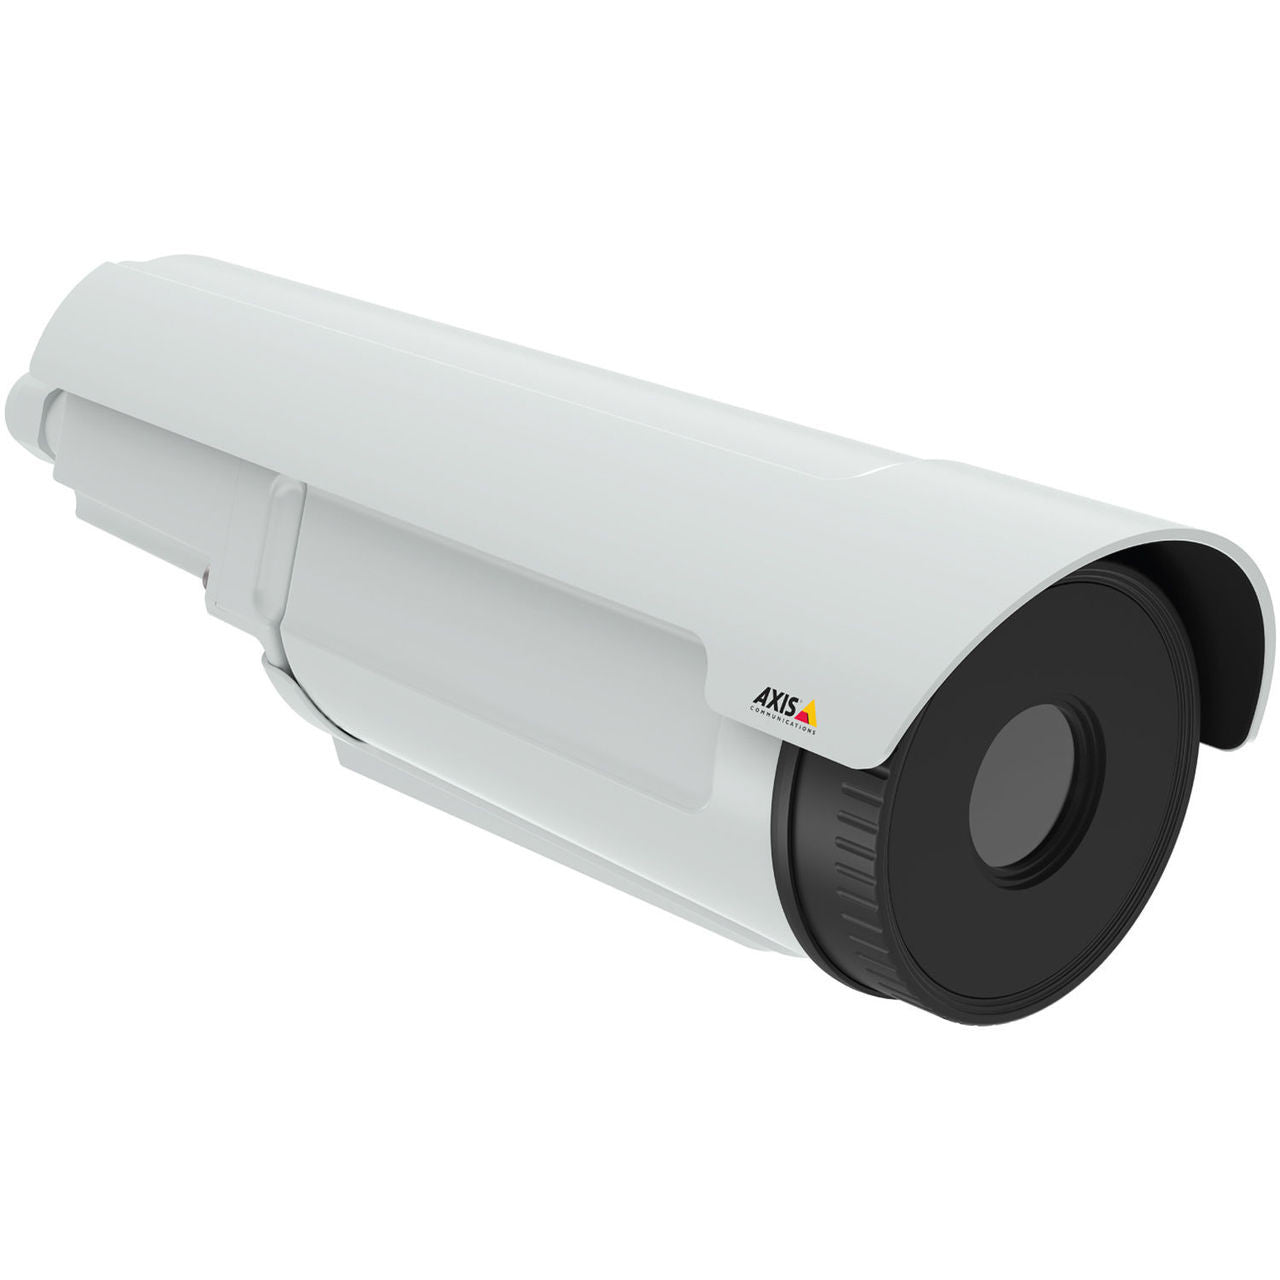 AXIS Q1942-E PT Mount (0987-001) 60mm 30fps Thermal Network Camera